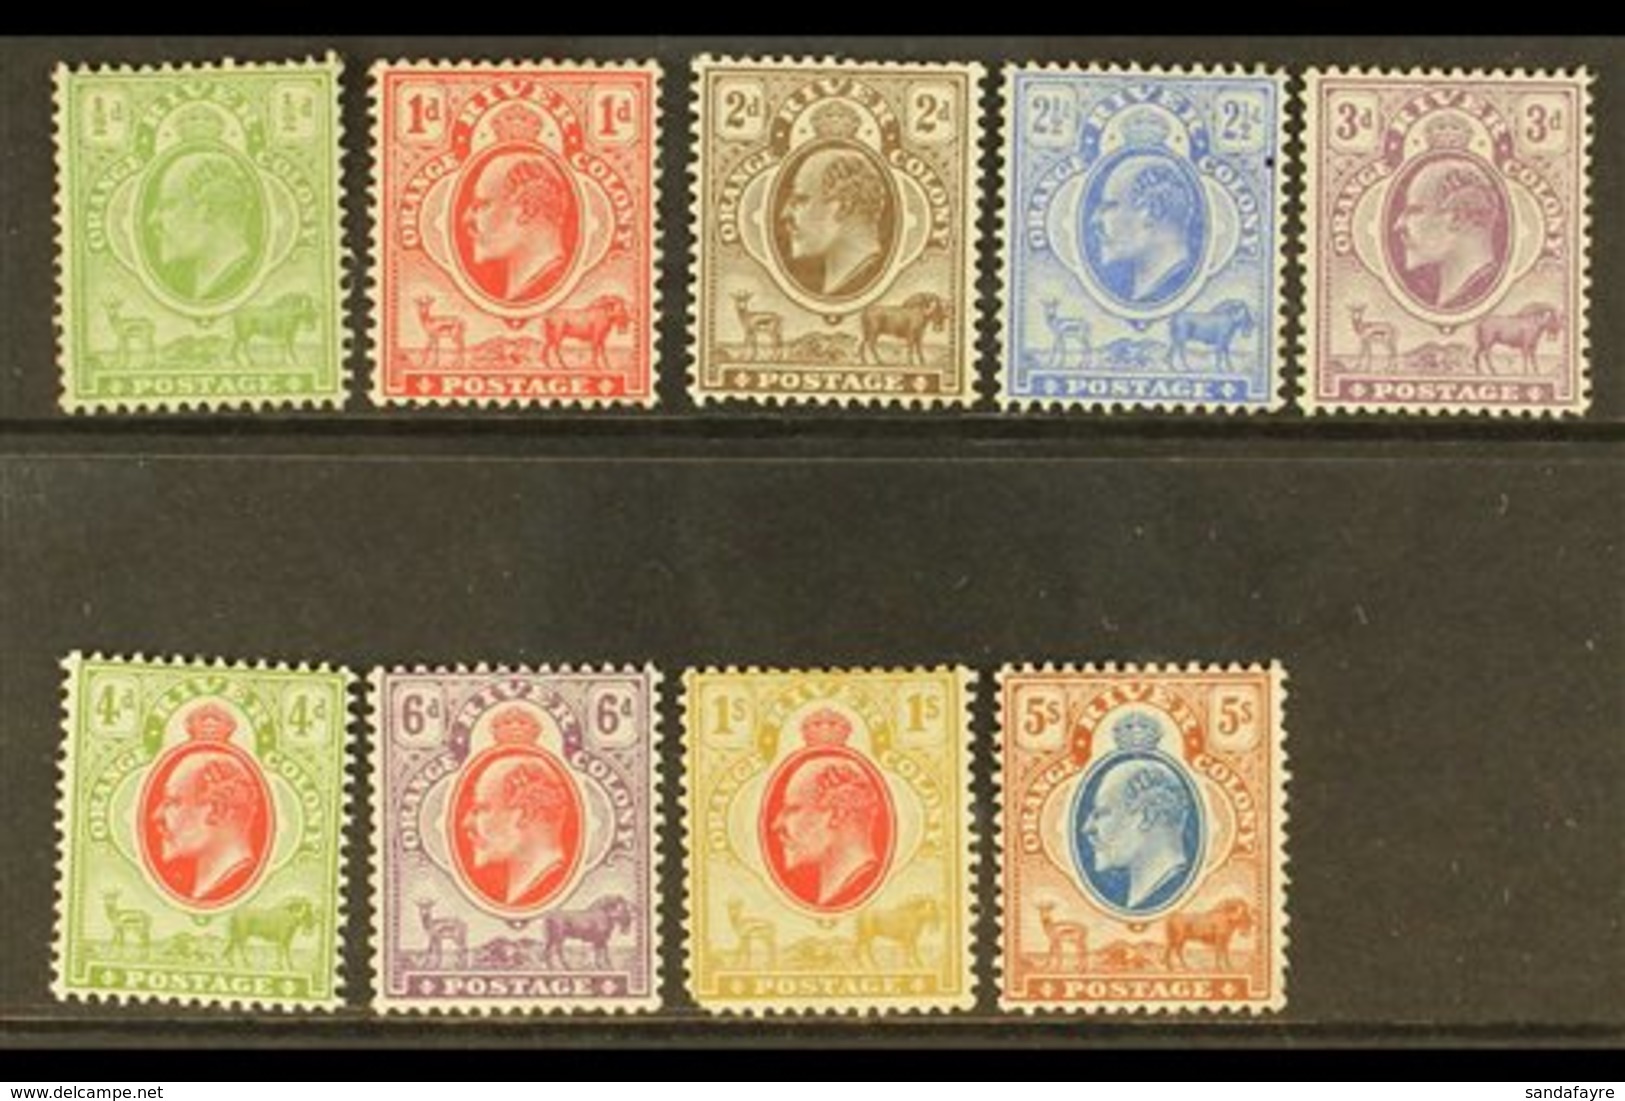 ORANGE RIVER COLONY 1903-04 Complete Set, SG 139/147, Mainly Fine Mint, The 1s With Faults. (9 Stamps) For More Images,  - Non Classificati